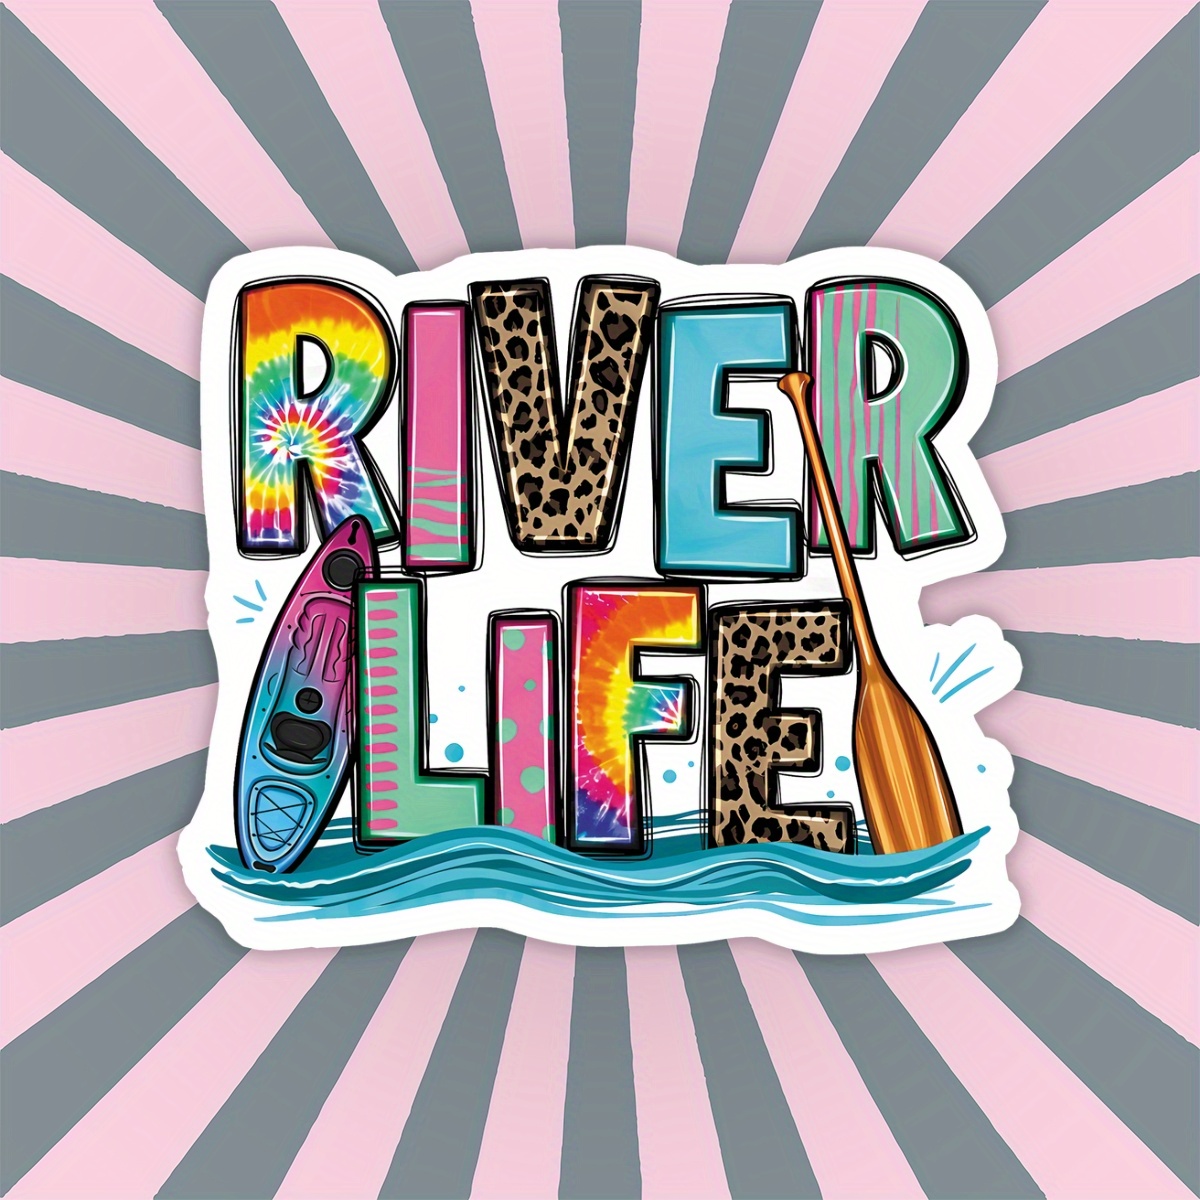 

river Life" Waterproof Outdoor Adventure Sticker - Perfect Gift For Kayaking Enthusiasts